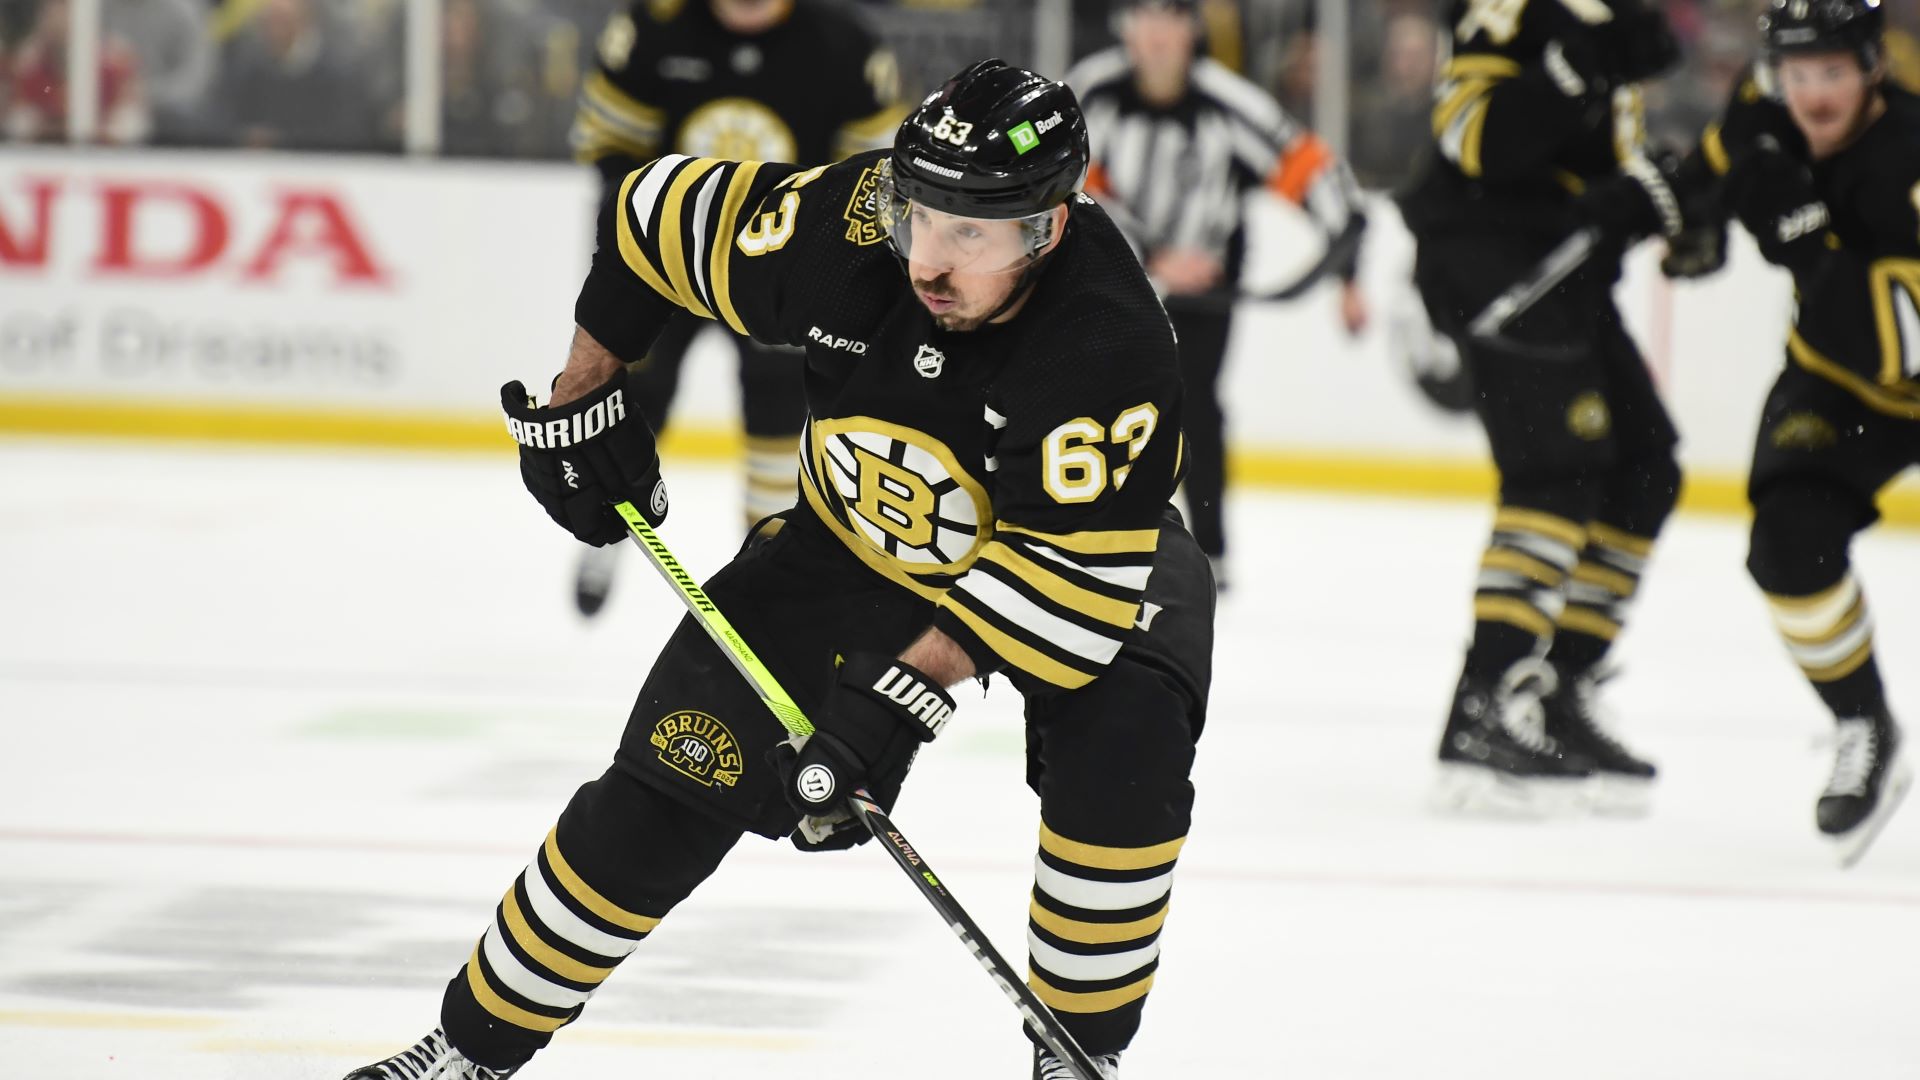 Bruins Captain Brad Marchand Opens Up About Injury He ‘Pushed’
Through